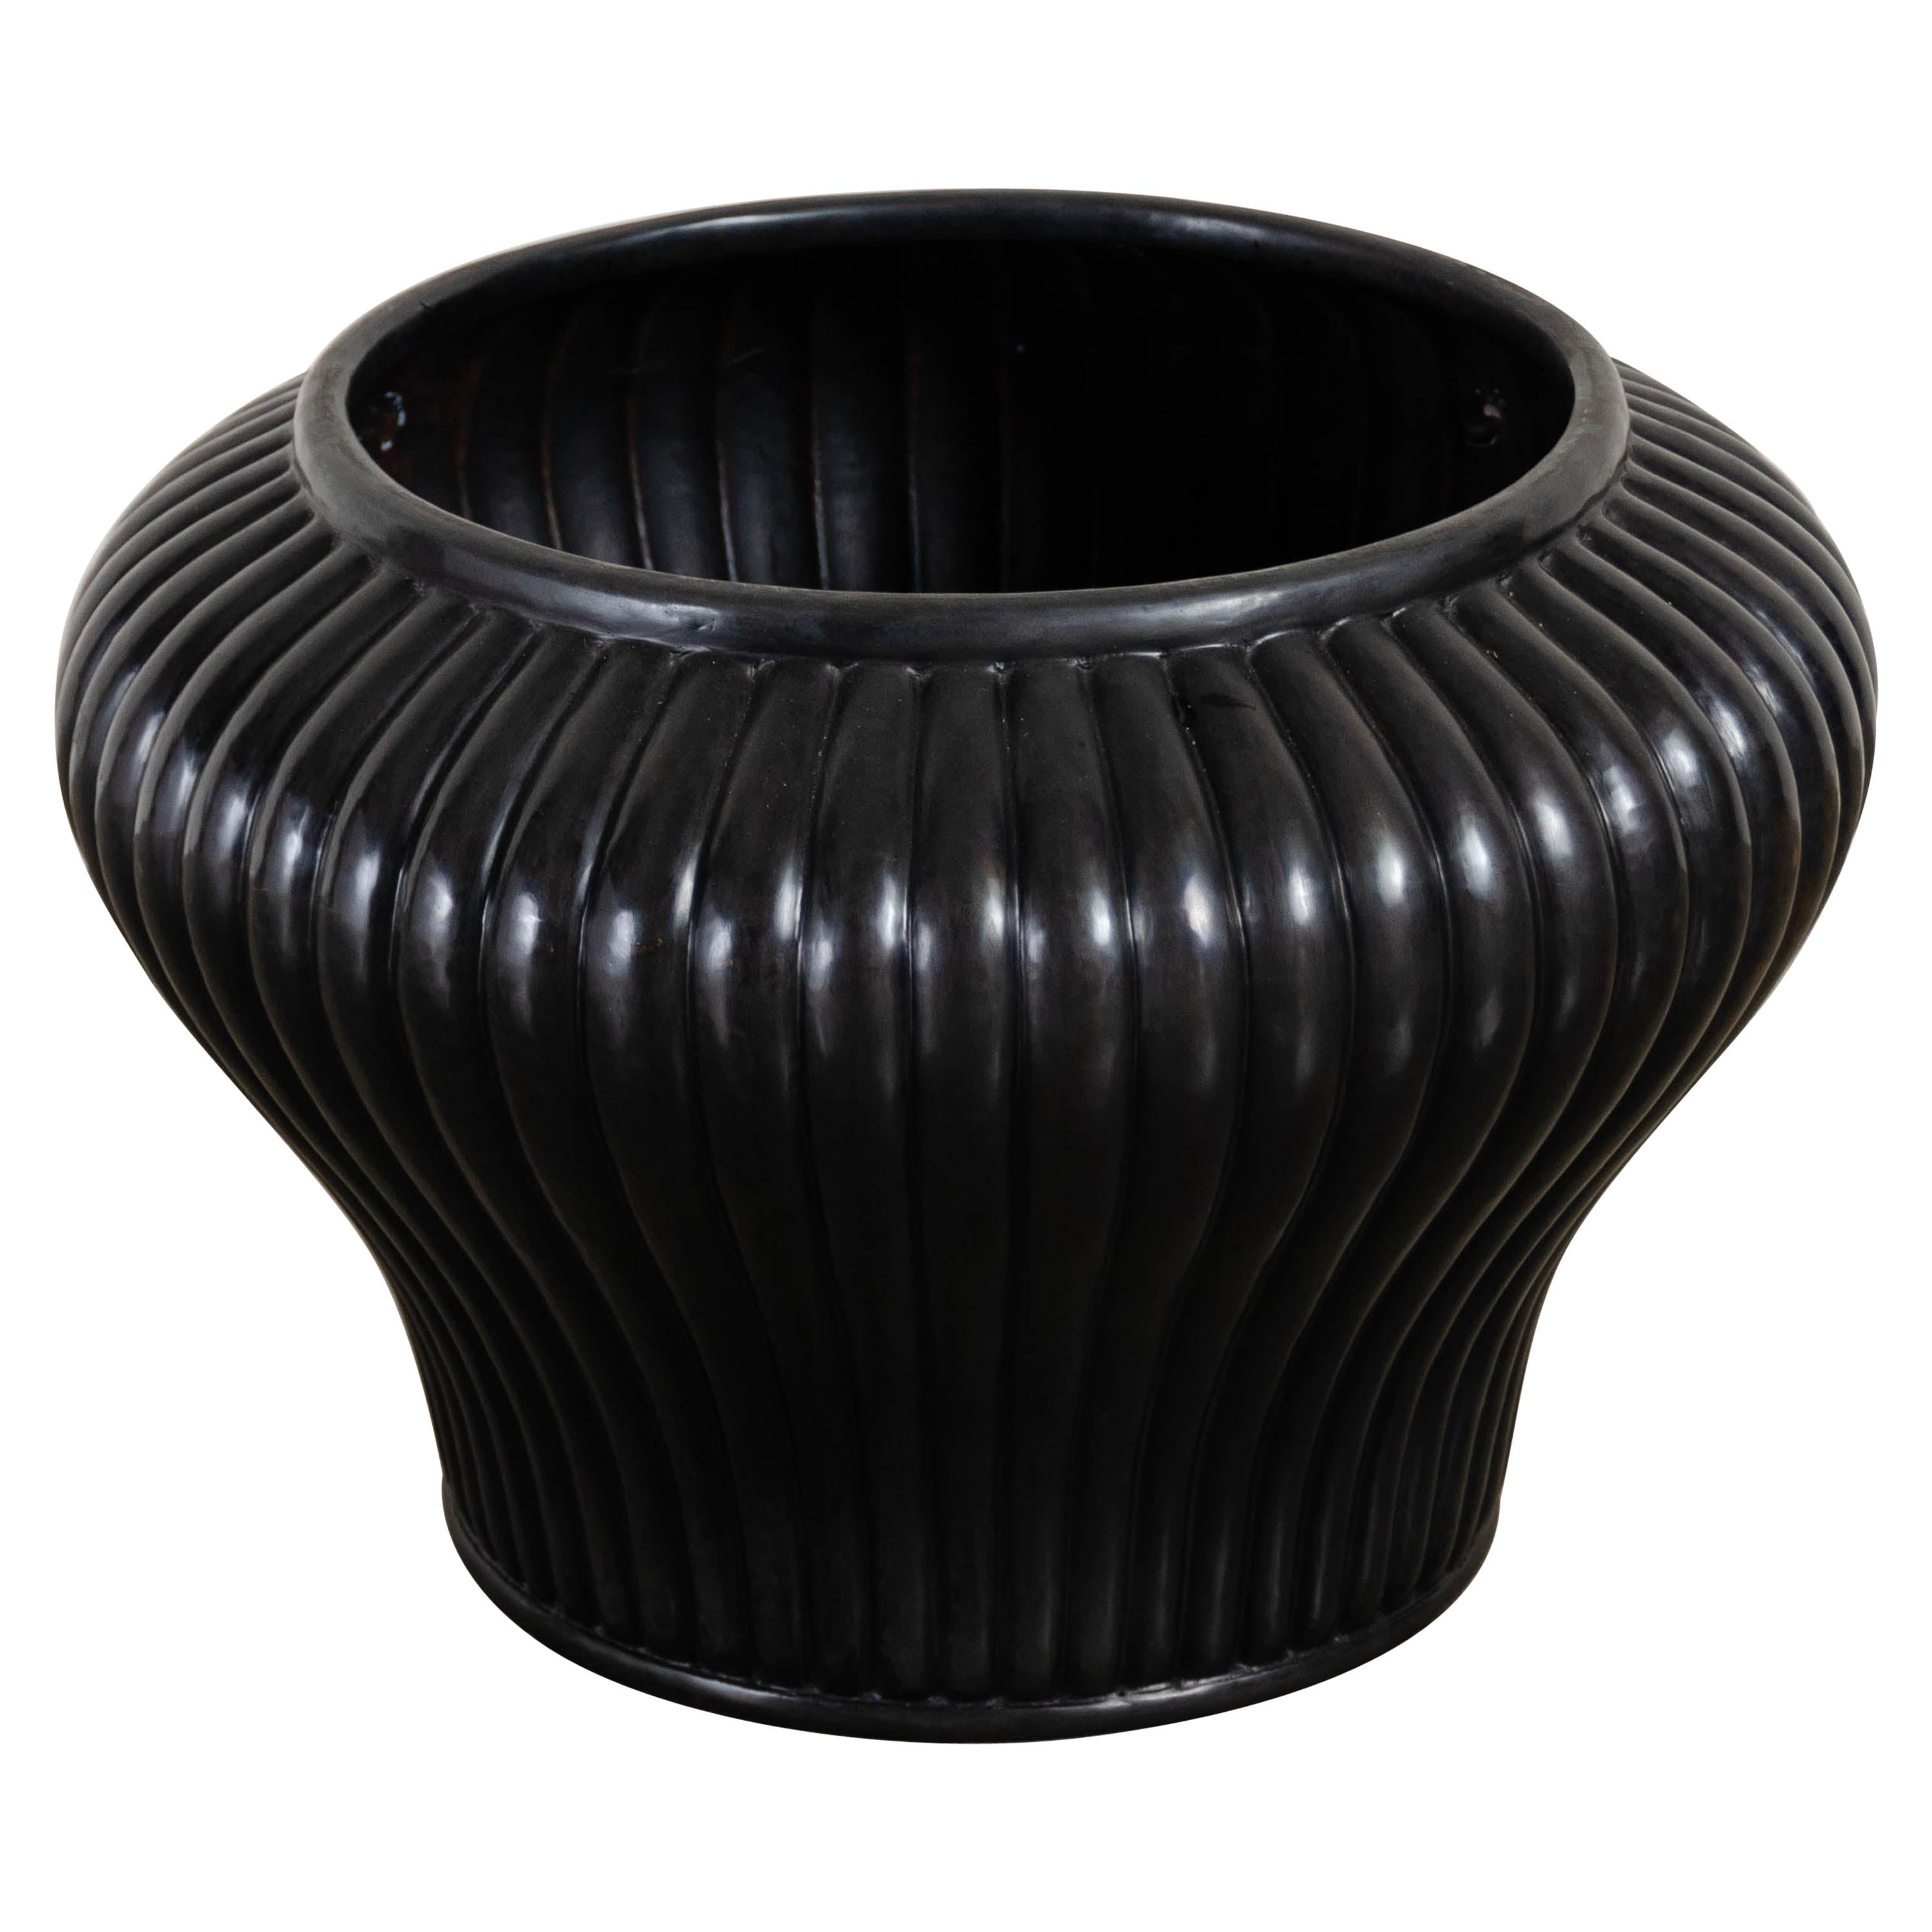 Chrysanthemum Lobe Kung Pot, Black Copper by Robert Kuo, Hand Repousse, Limited For Sale